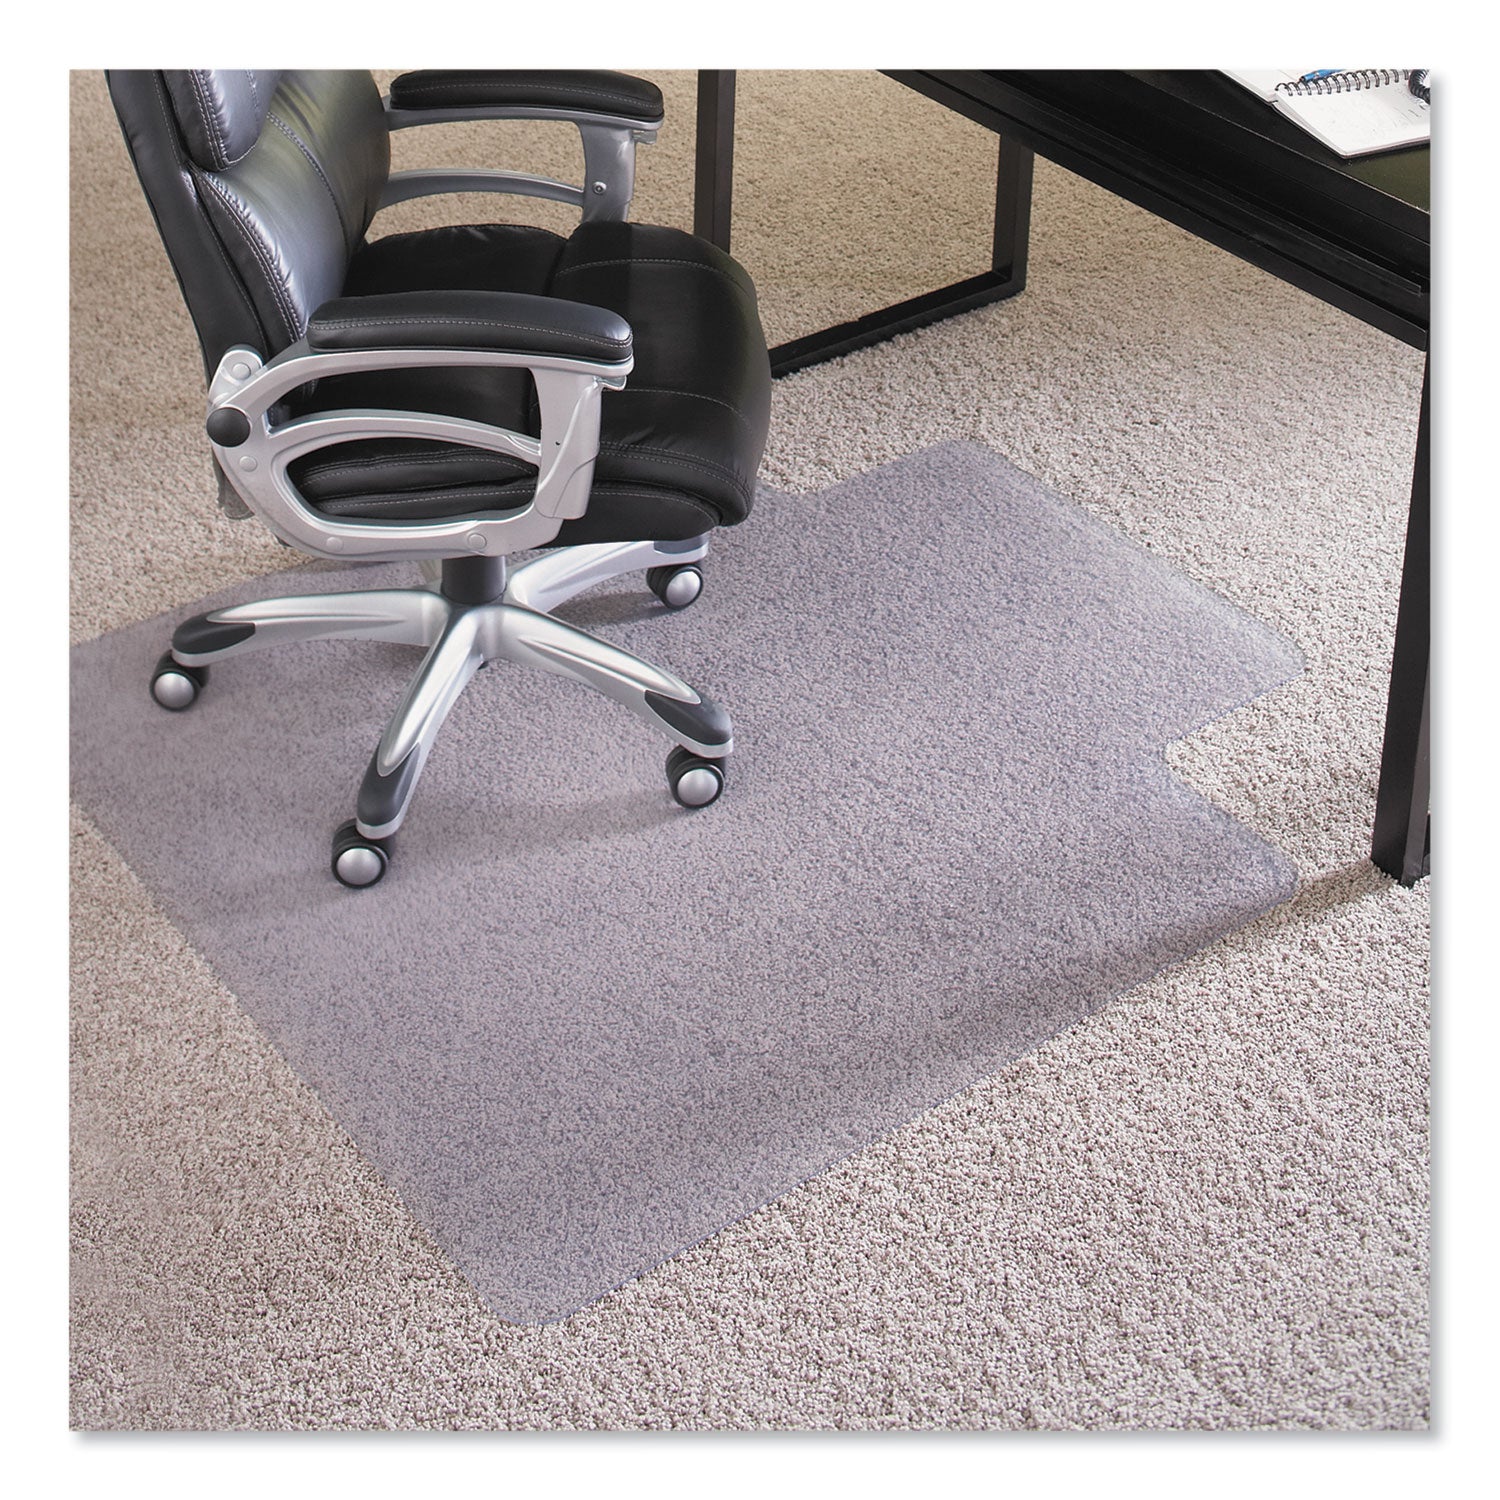 EverLife Intensive Use Chair Mat for High Pile Carpet, Rectangular with Lip, 36 x 48, Clear - 